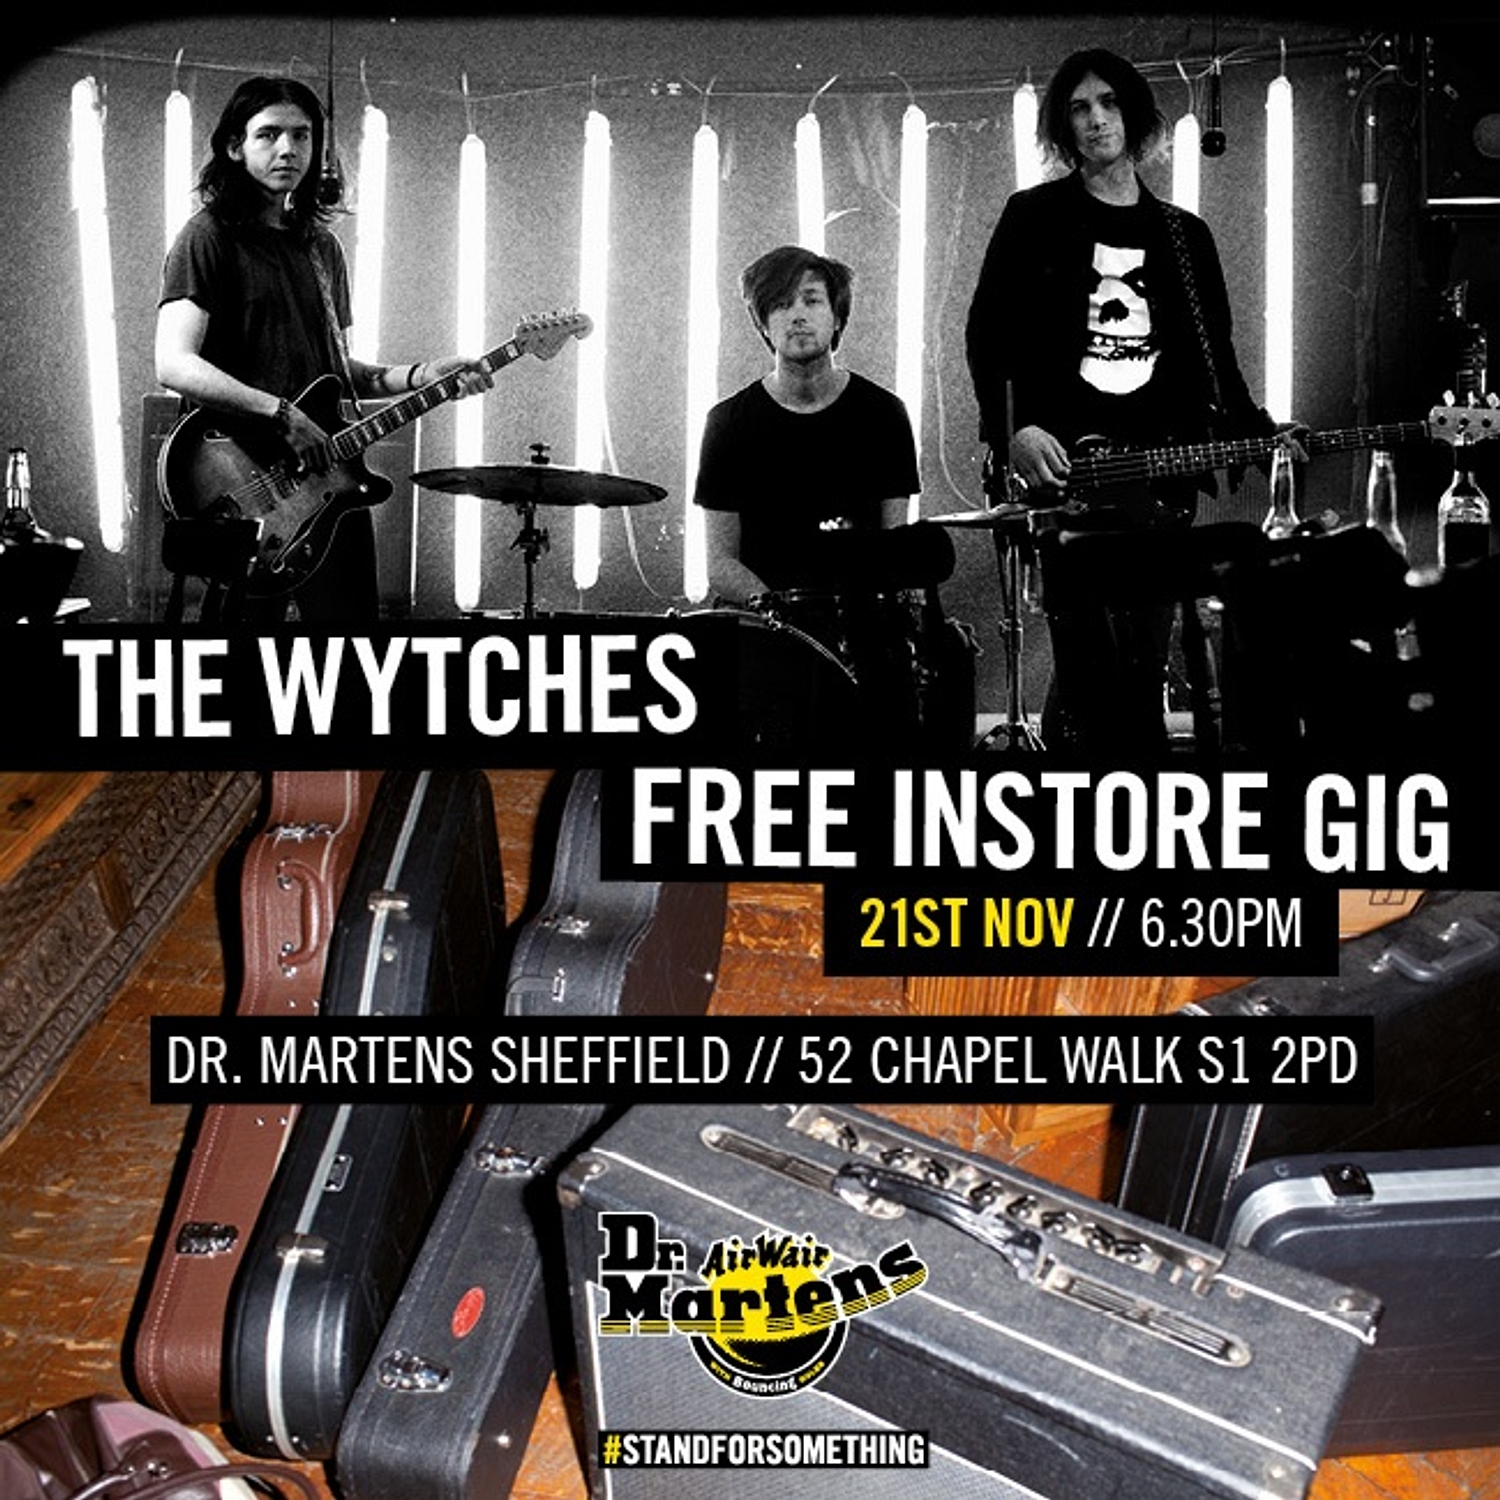 The Wytches to perform at Sheffield Dr. Martens store